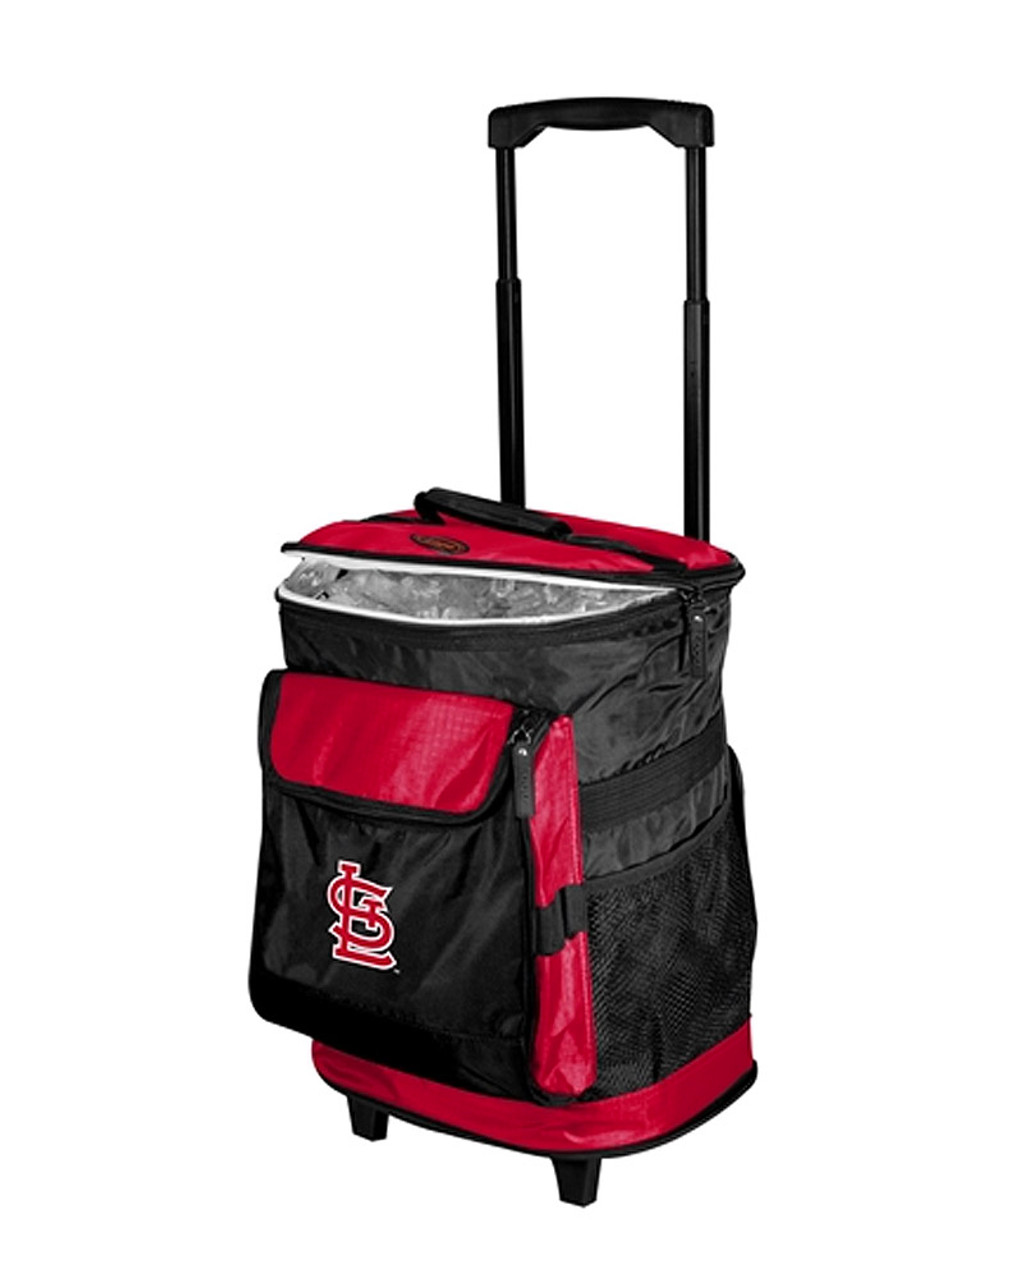 Officially Licensed St Louis Cardinals Coolers By YETI